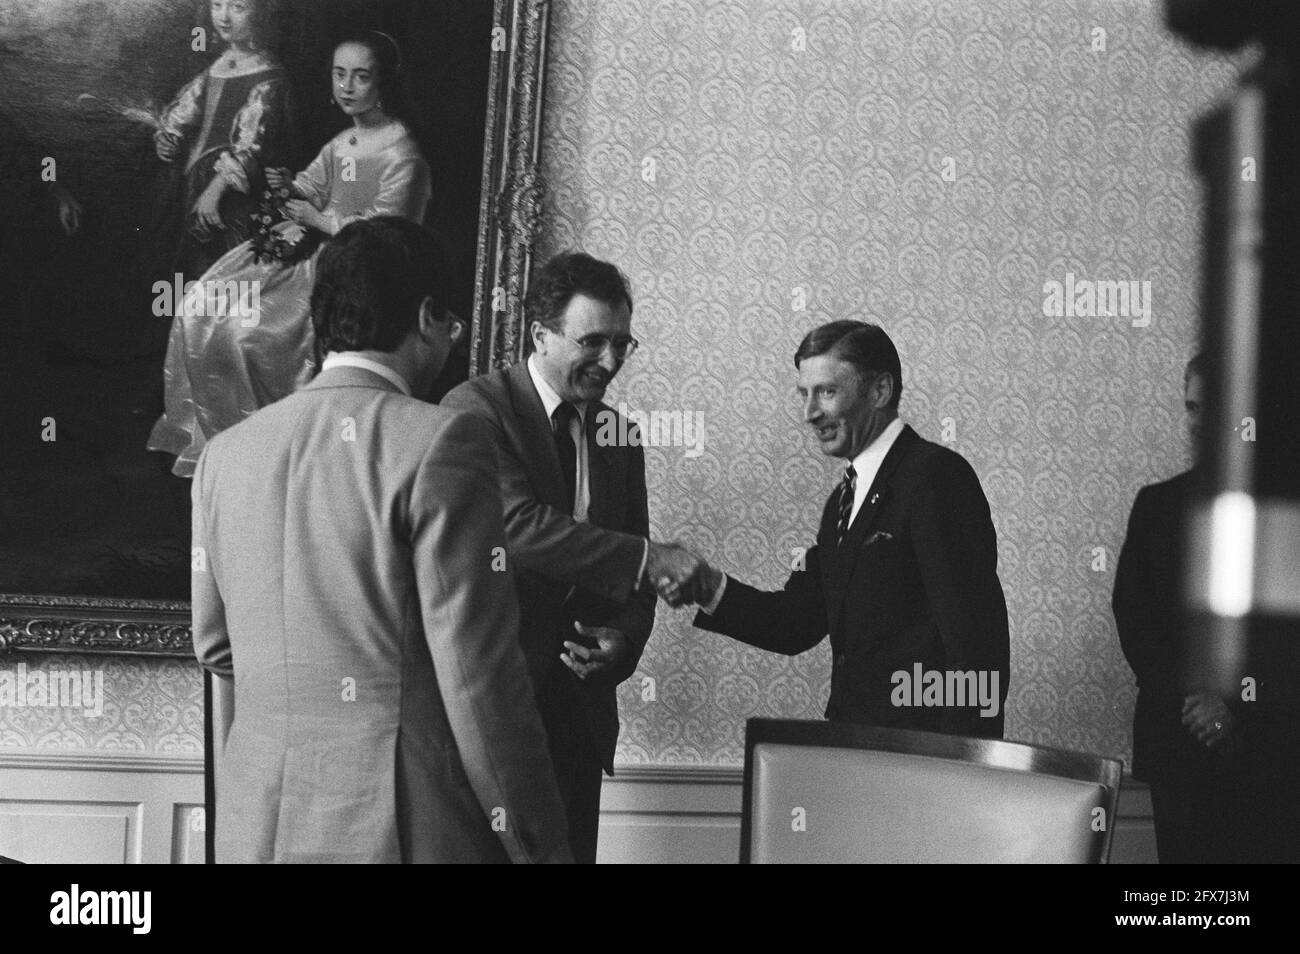 Cabinet Information 1981 with formateurs Van Thijn and Kremers; formateurs receive Van Agt, Kremers shakes Van Agt's hand, August 5, 1981, Formateurs, Cabinet Information, The Netherlands, 20th century press agency photo, news to remember, documentary, historic photography 1945-1990, visual stories, human history of the Twentieth Century, capturing moments in time Stock Photo